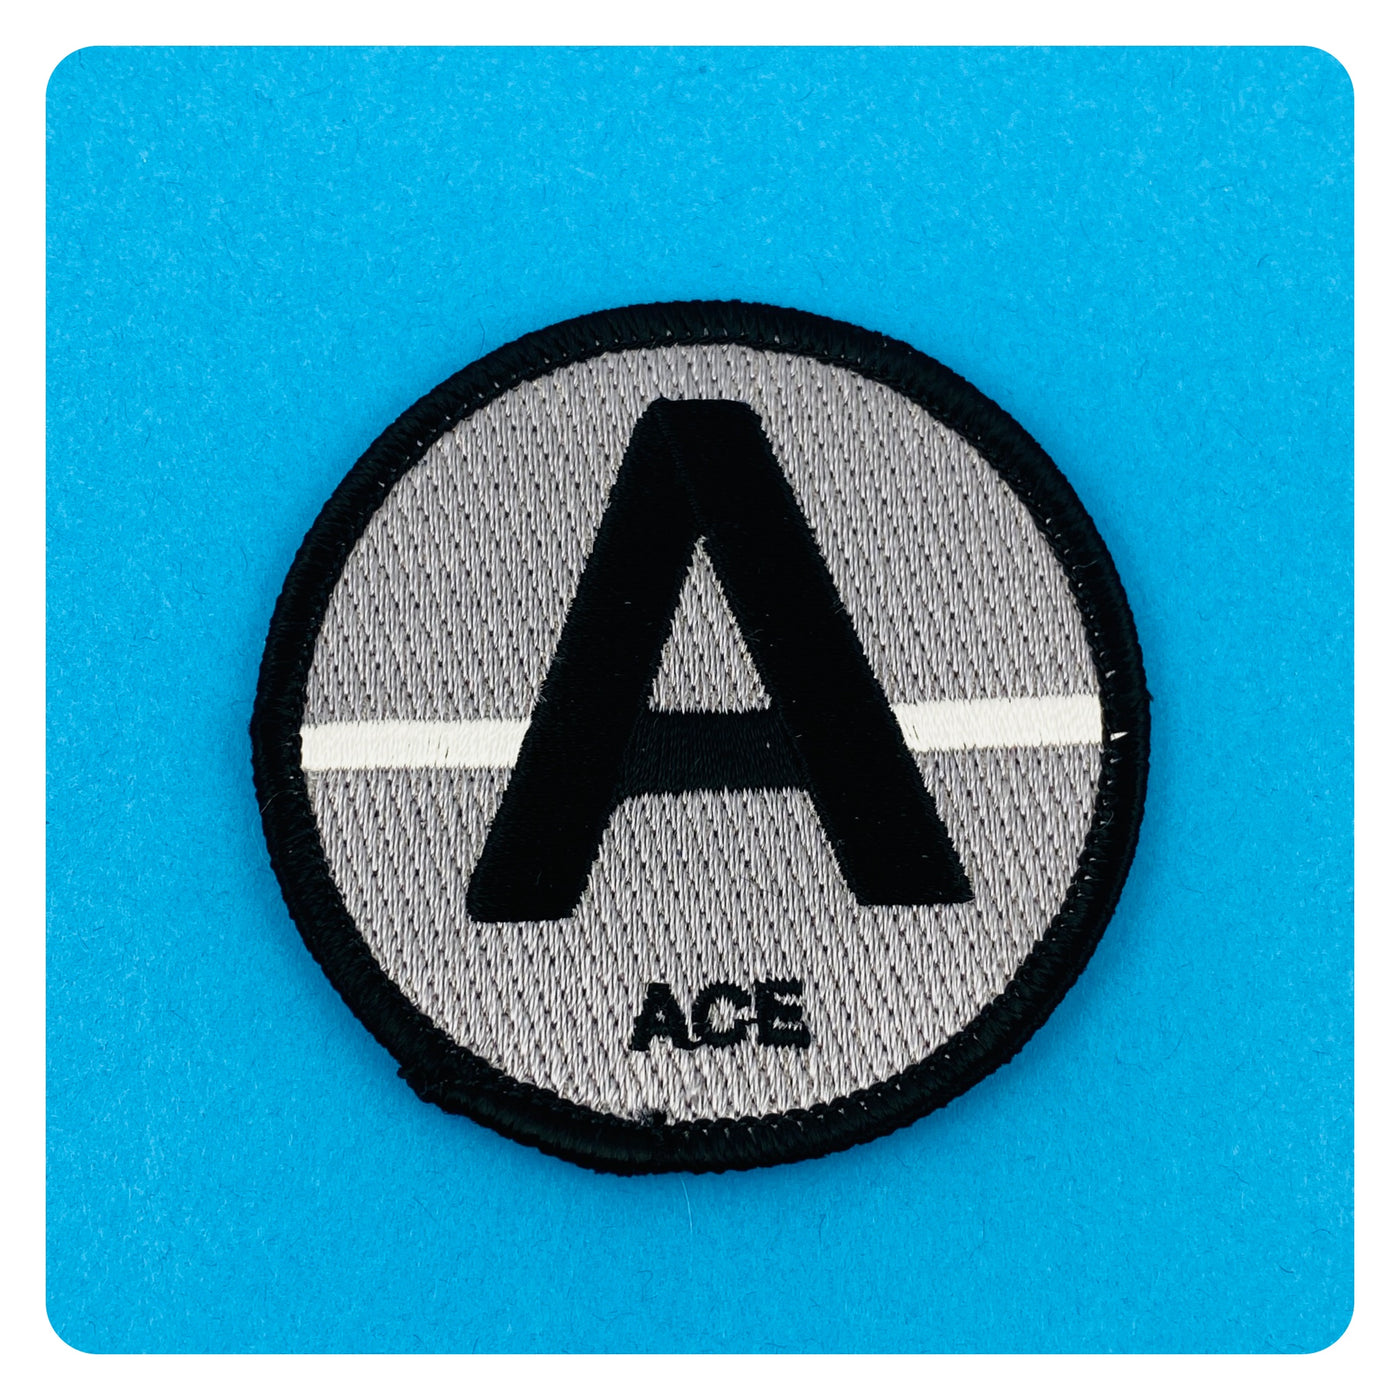 Asexual Identity Iron On Patch